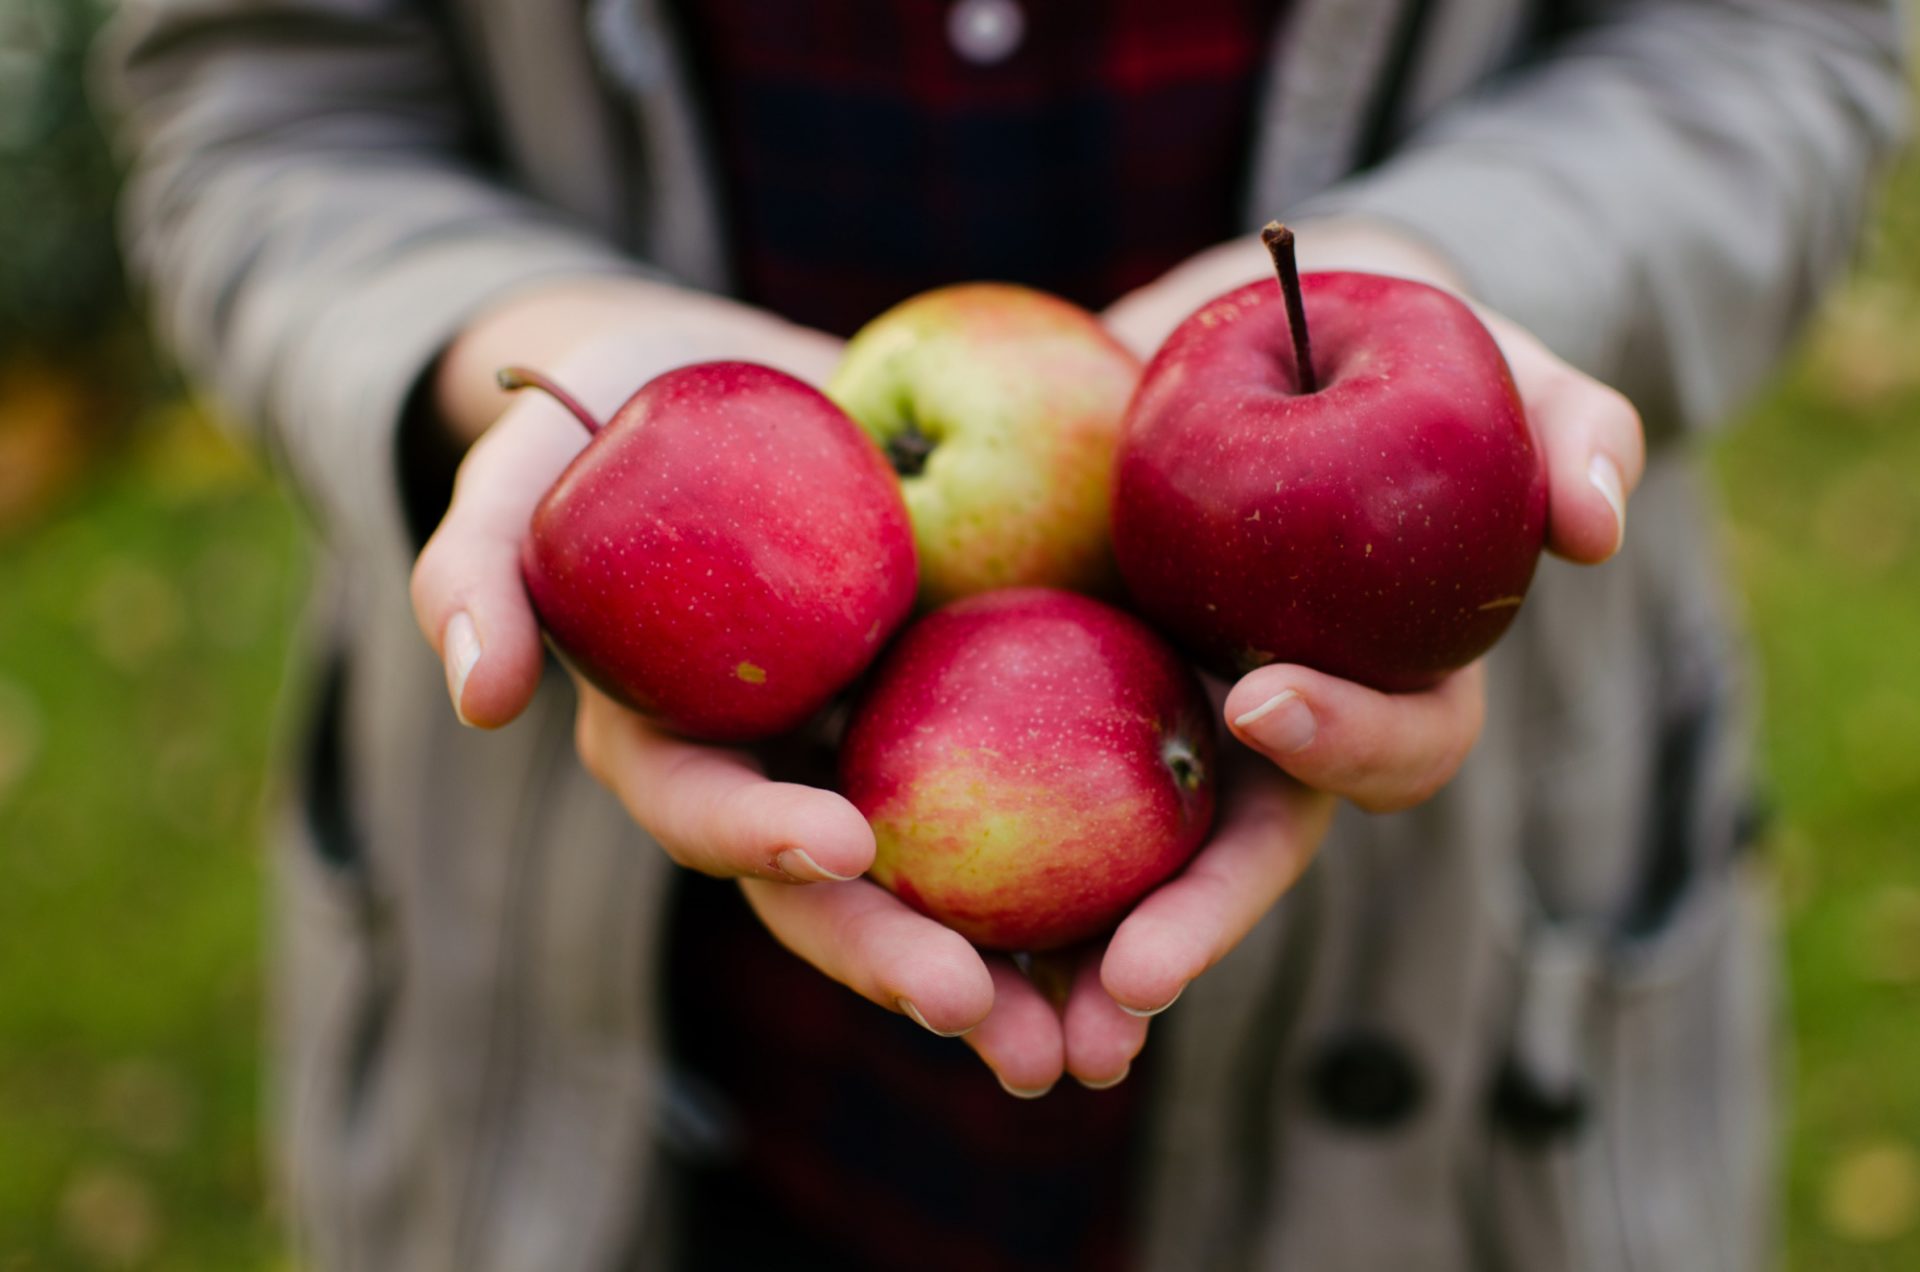 Woman holding 4 freshly picked apples which are some of the best foods for a healthy gut.